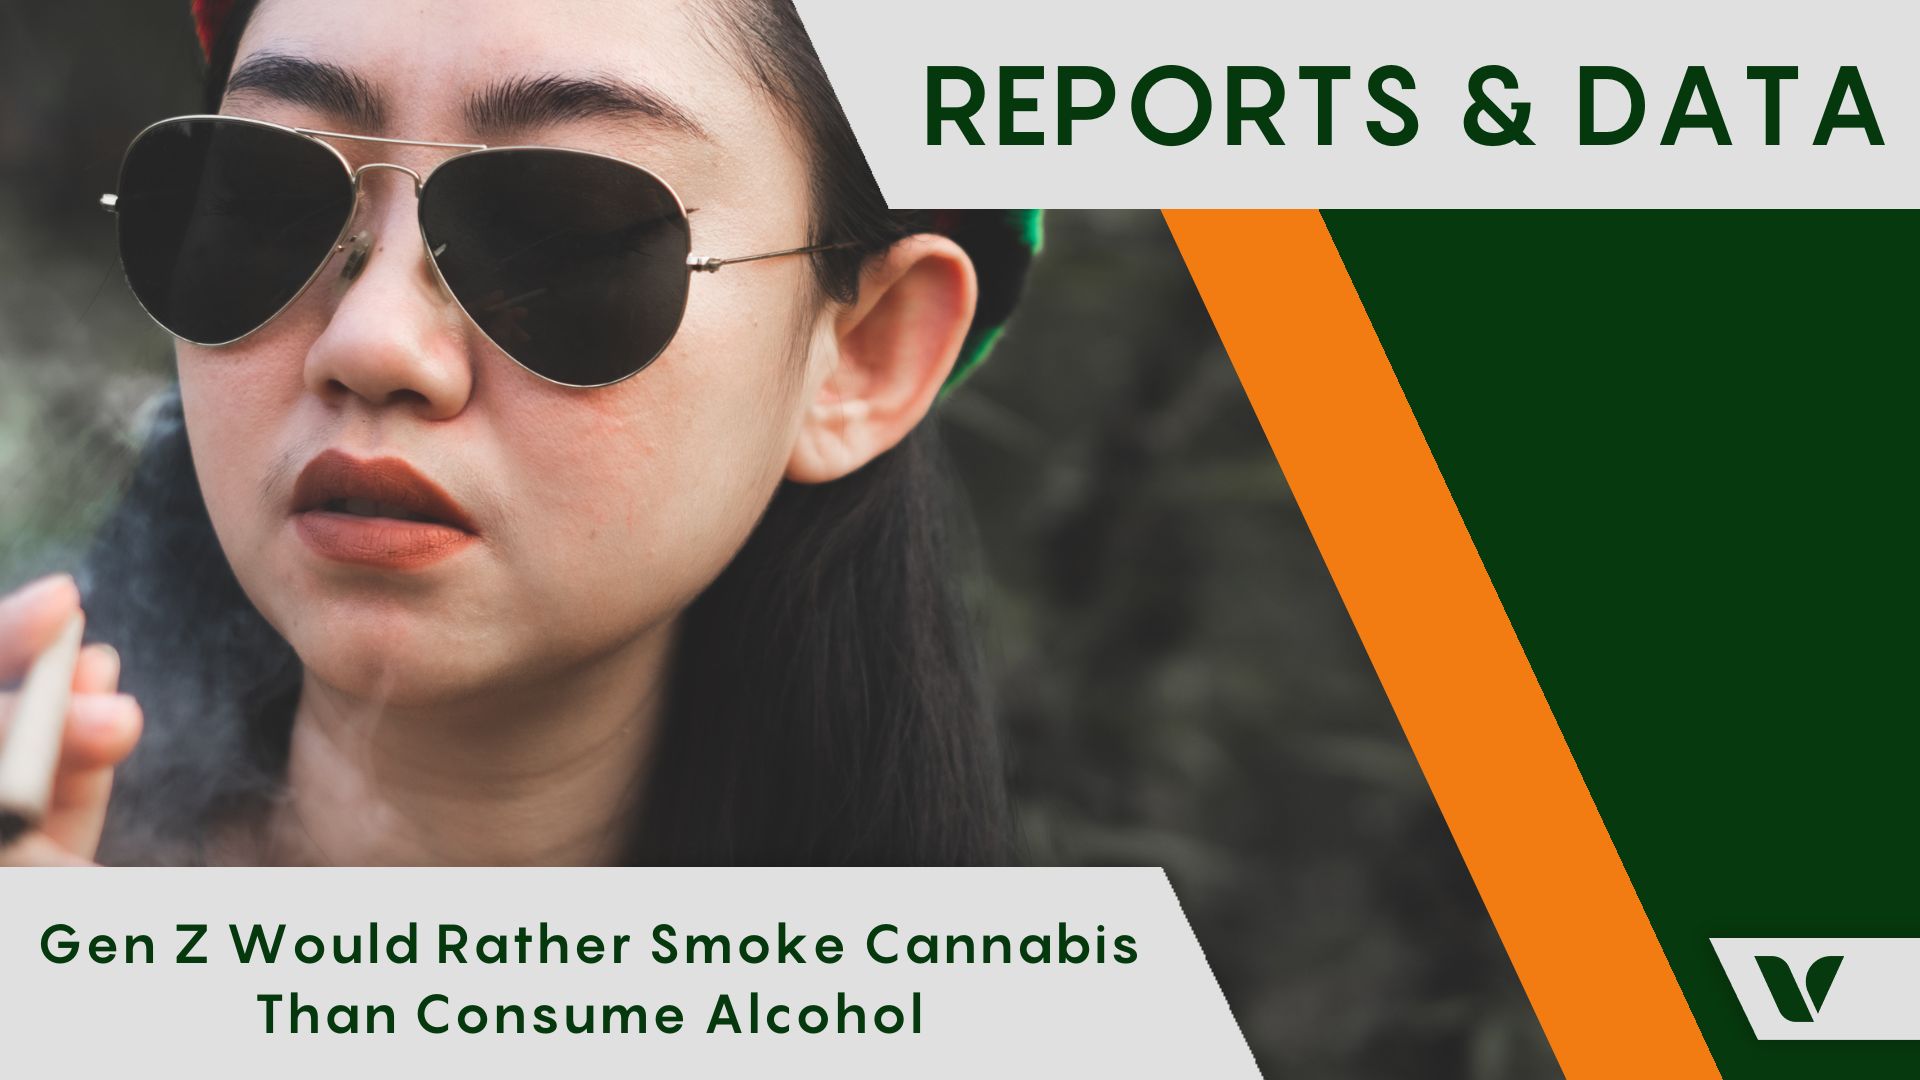 Report: Gen Z Would Rather Smoke Cannabis Than Consume Alcohol